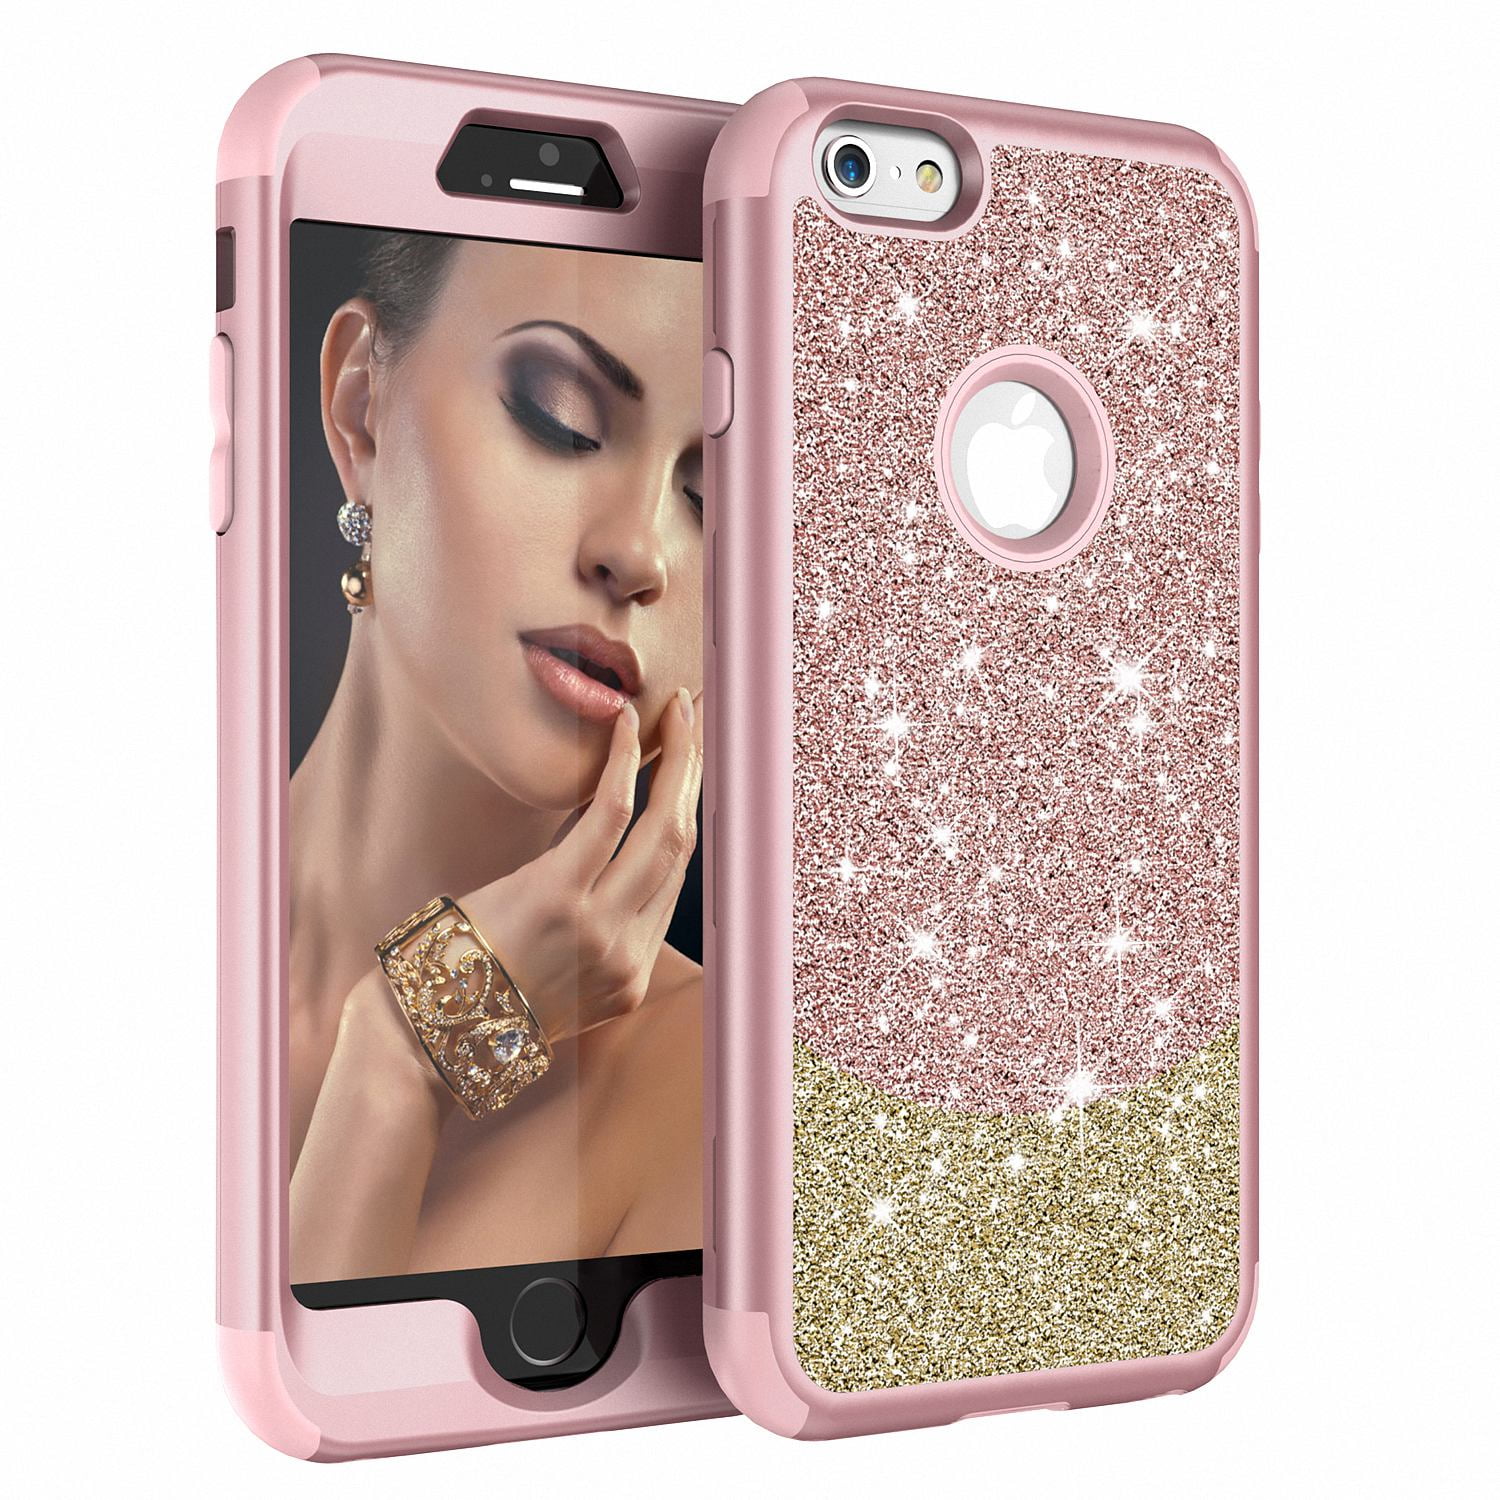 iPhone 6S Case, iPhone 6 Cover, Allytech Three Layer Silicone Shockproof Armor Glitter Anti-Scratch Bumper Full Protective Case Cover for Apple iPhone 6S / 6, Pink+Gold - Walmart.com